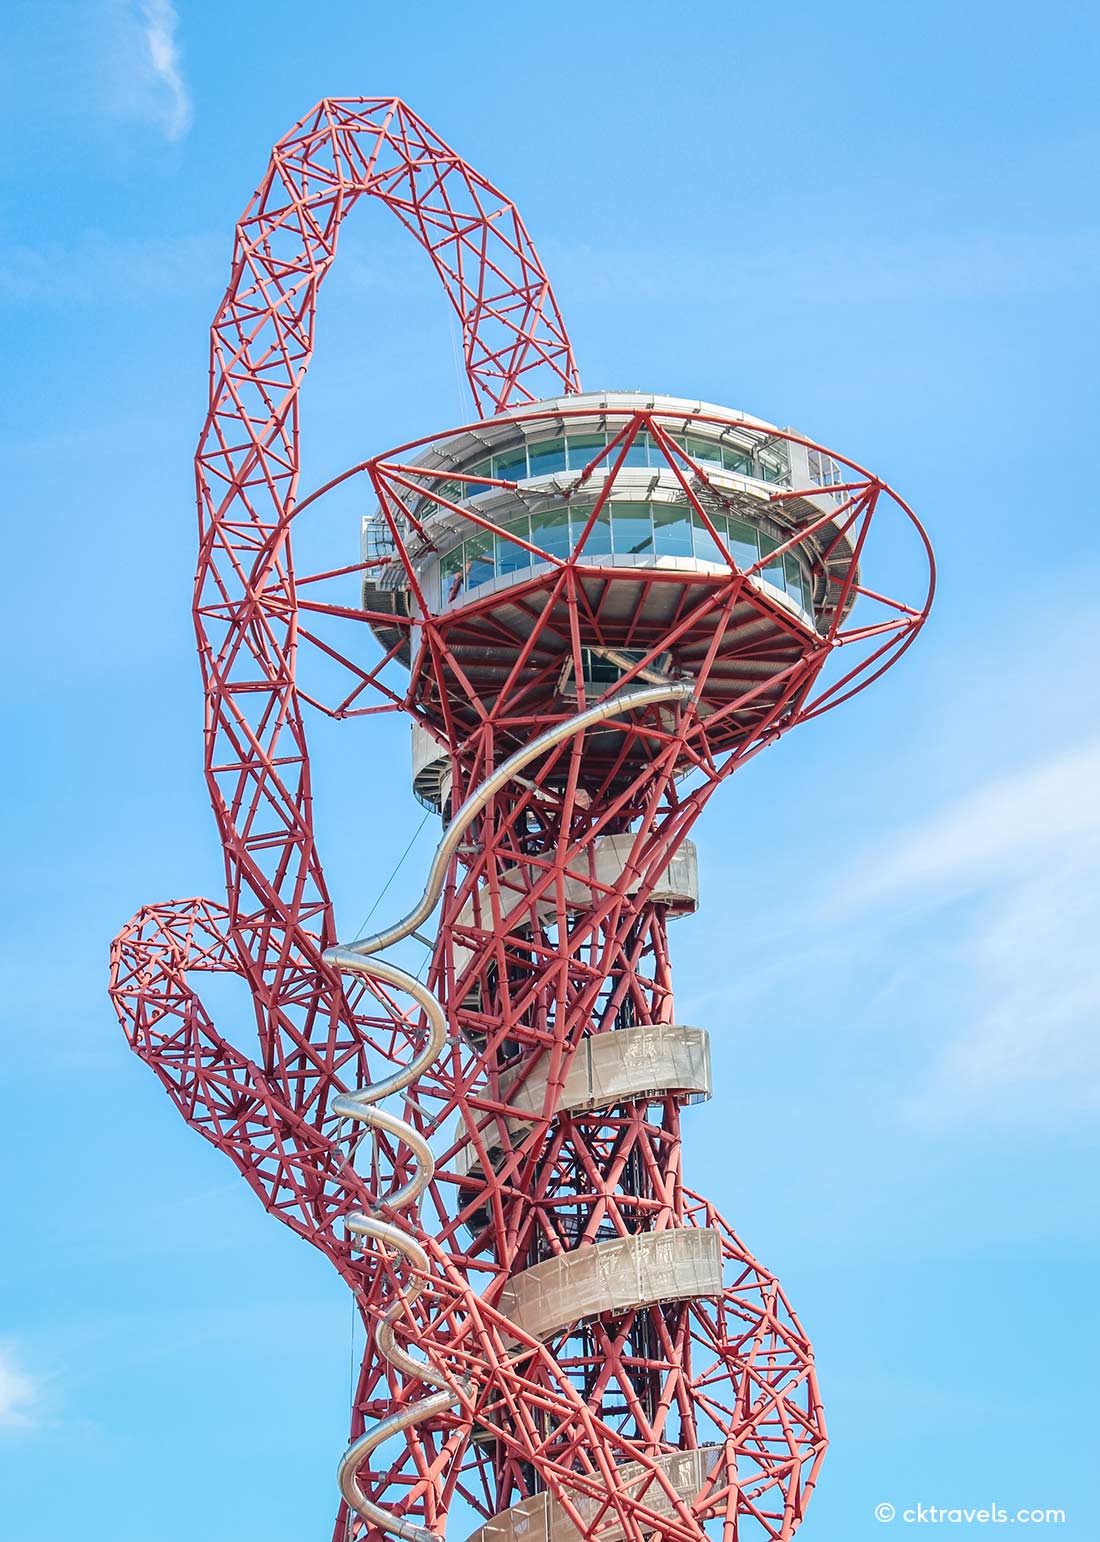 Olympic park Stratford. Best places in east London. Copyright CK Travels